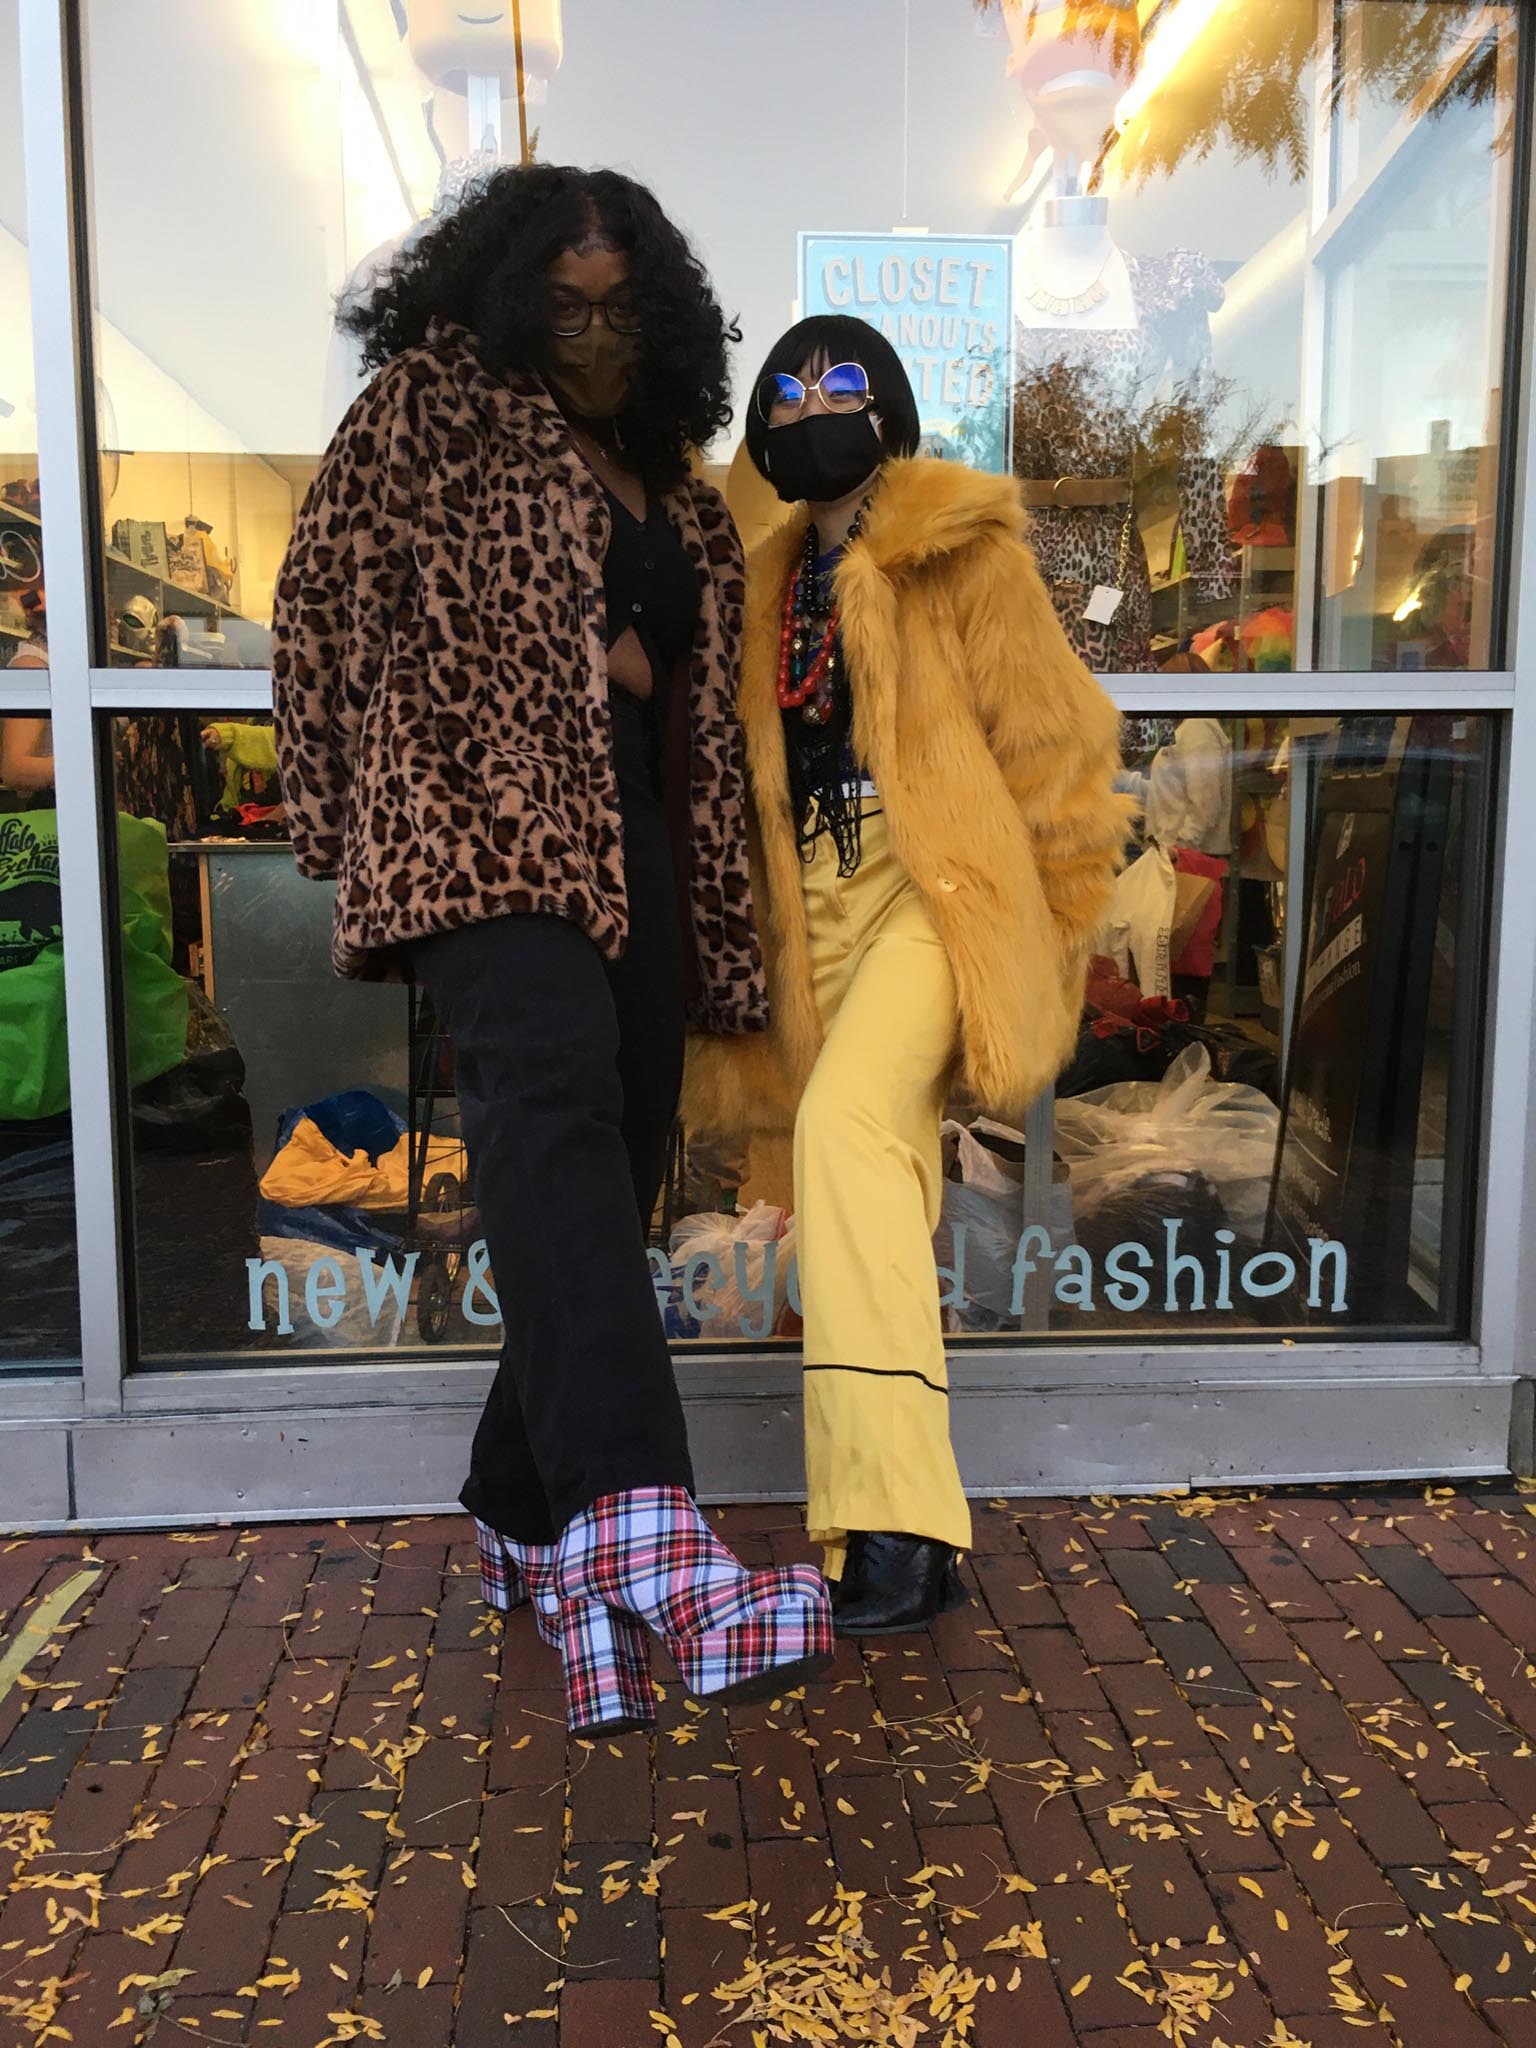 Two people posing in front of a store, the person on the right is wearing an animal print coat and the person on the right is wearing a yellow faux fur coat